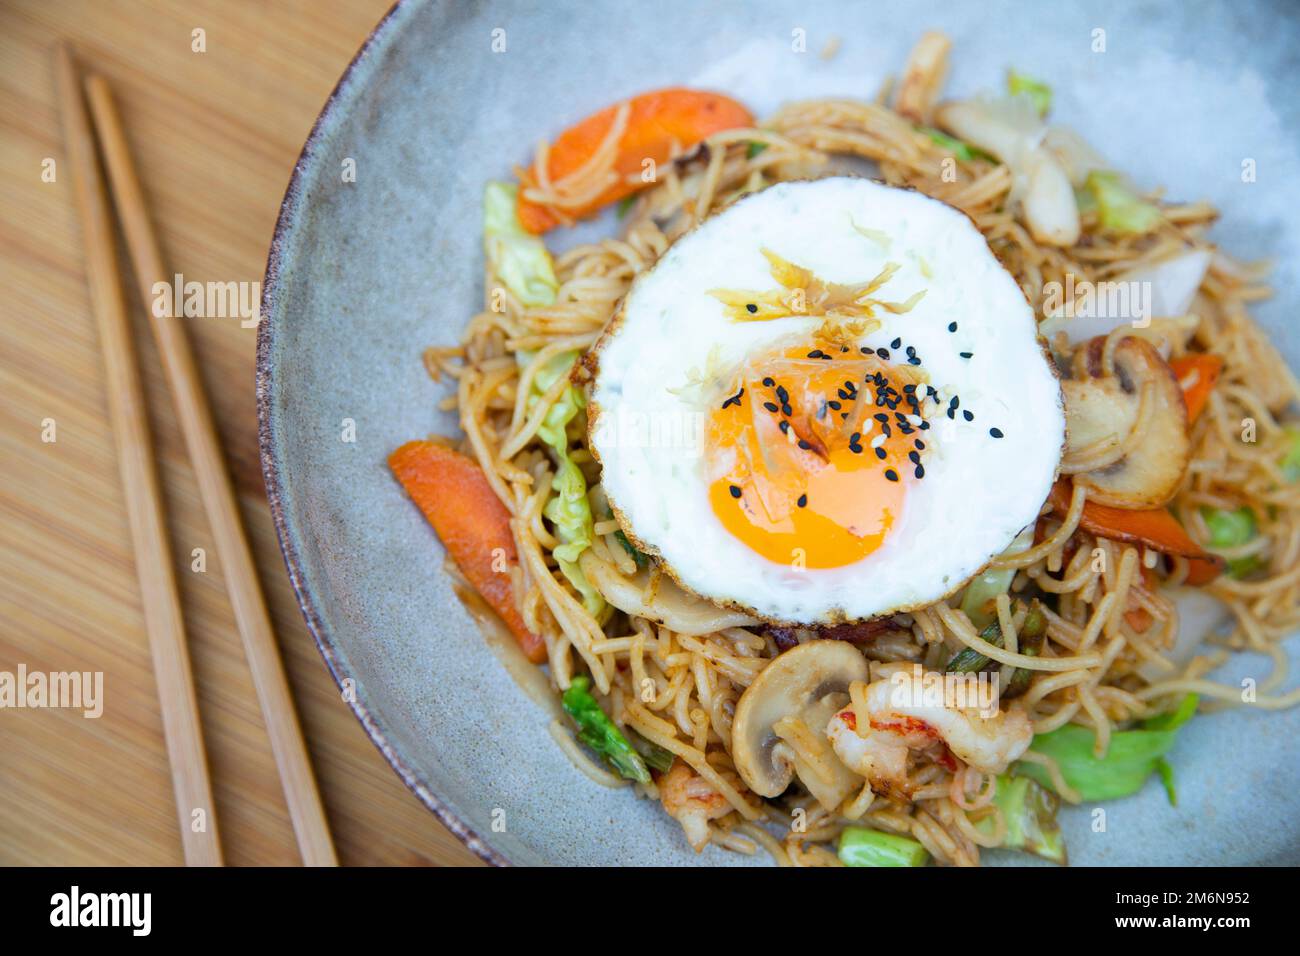 Yakisoba noddles with shrimps and egg on the top. Literally "fried noodles", integrated into Japanese cuisine, just like ramen. Stock Photo